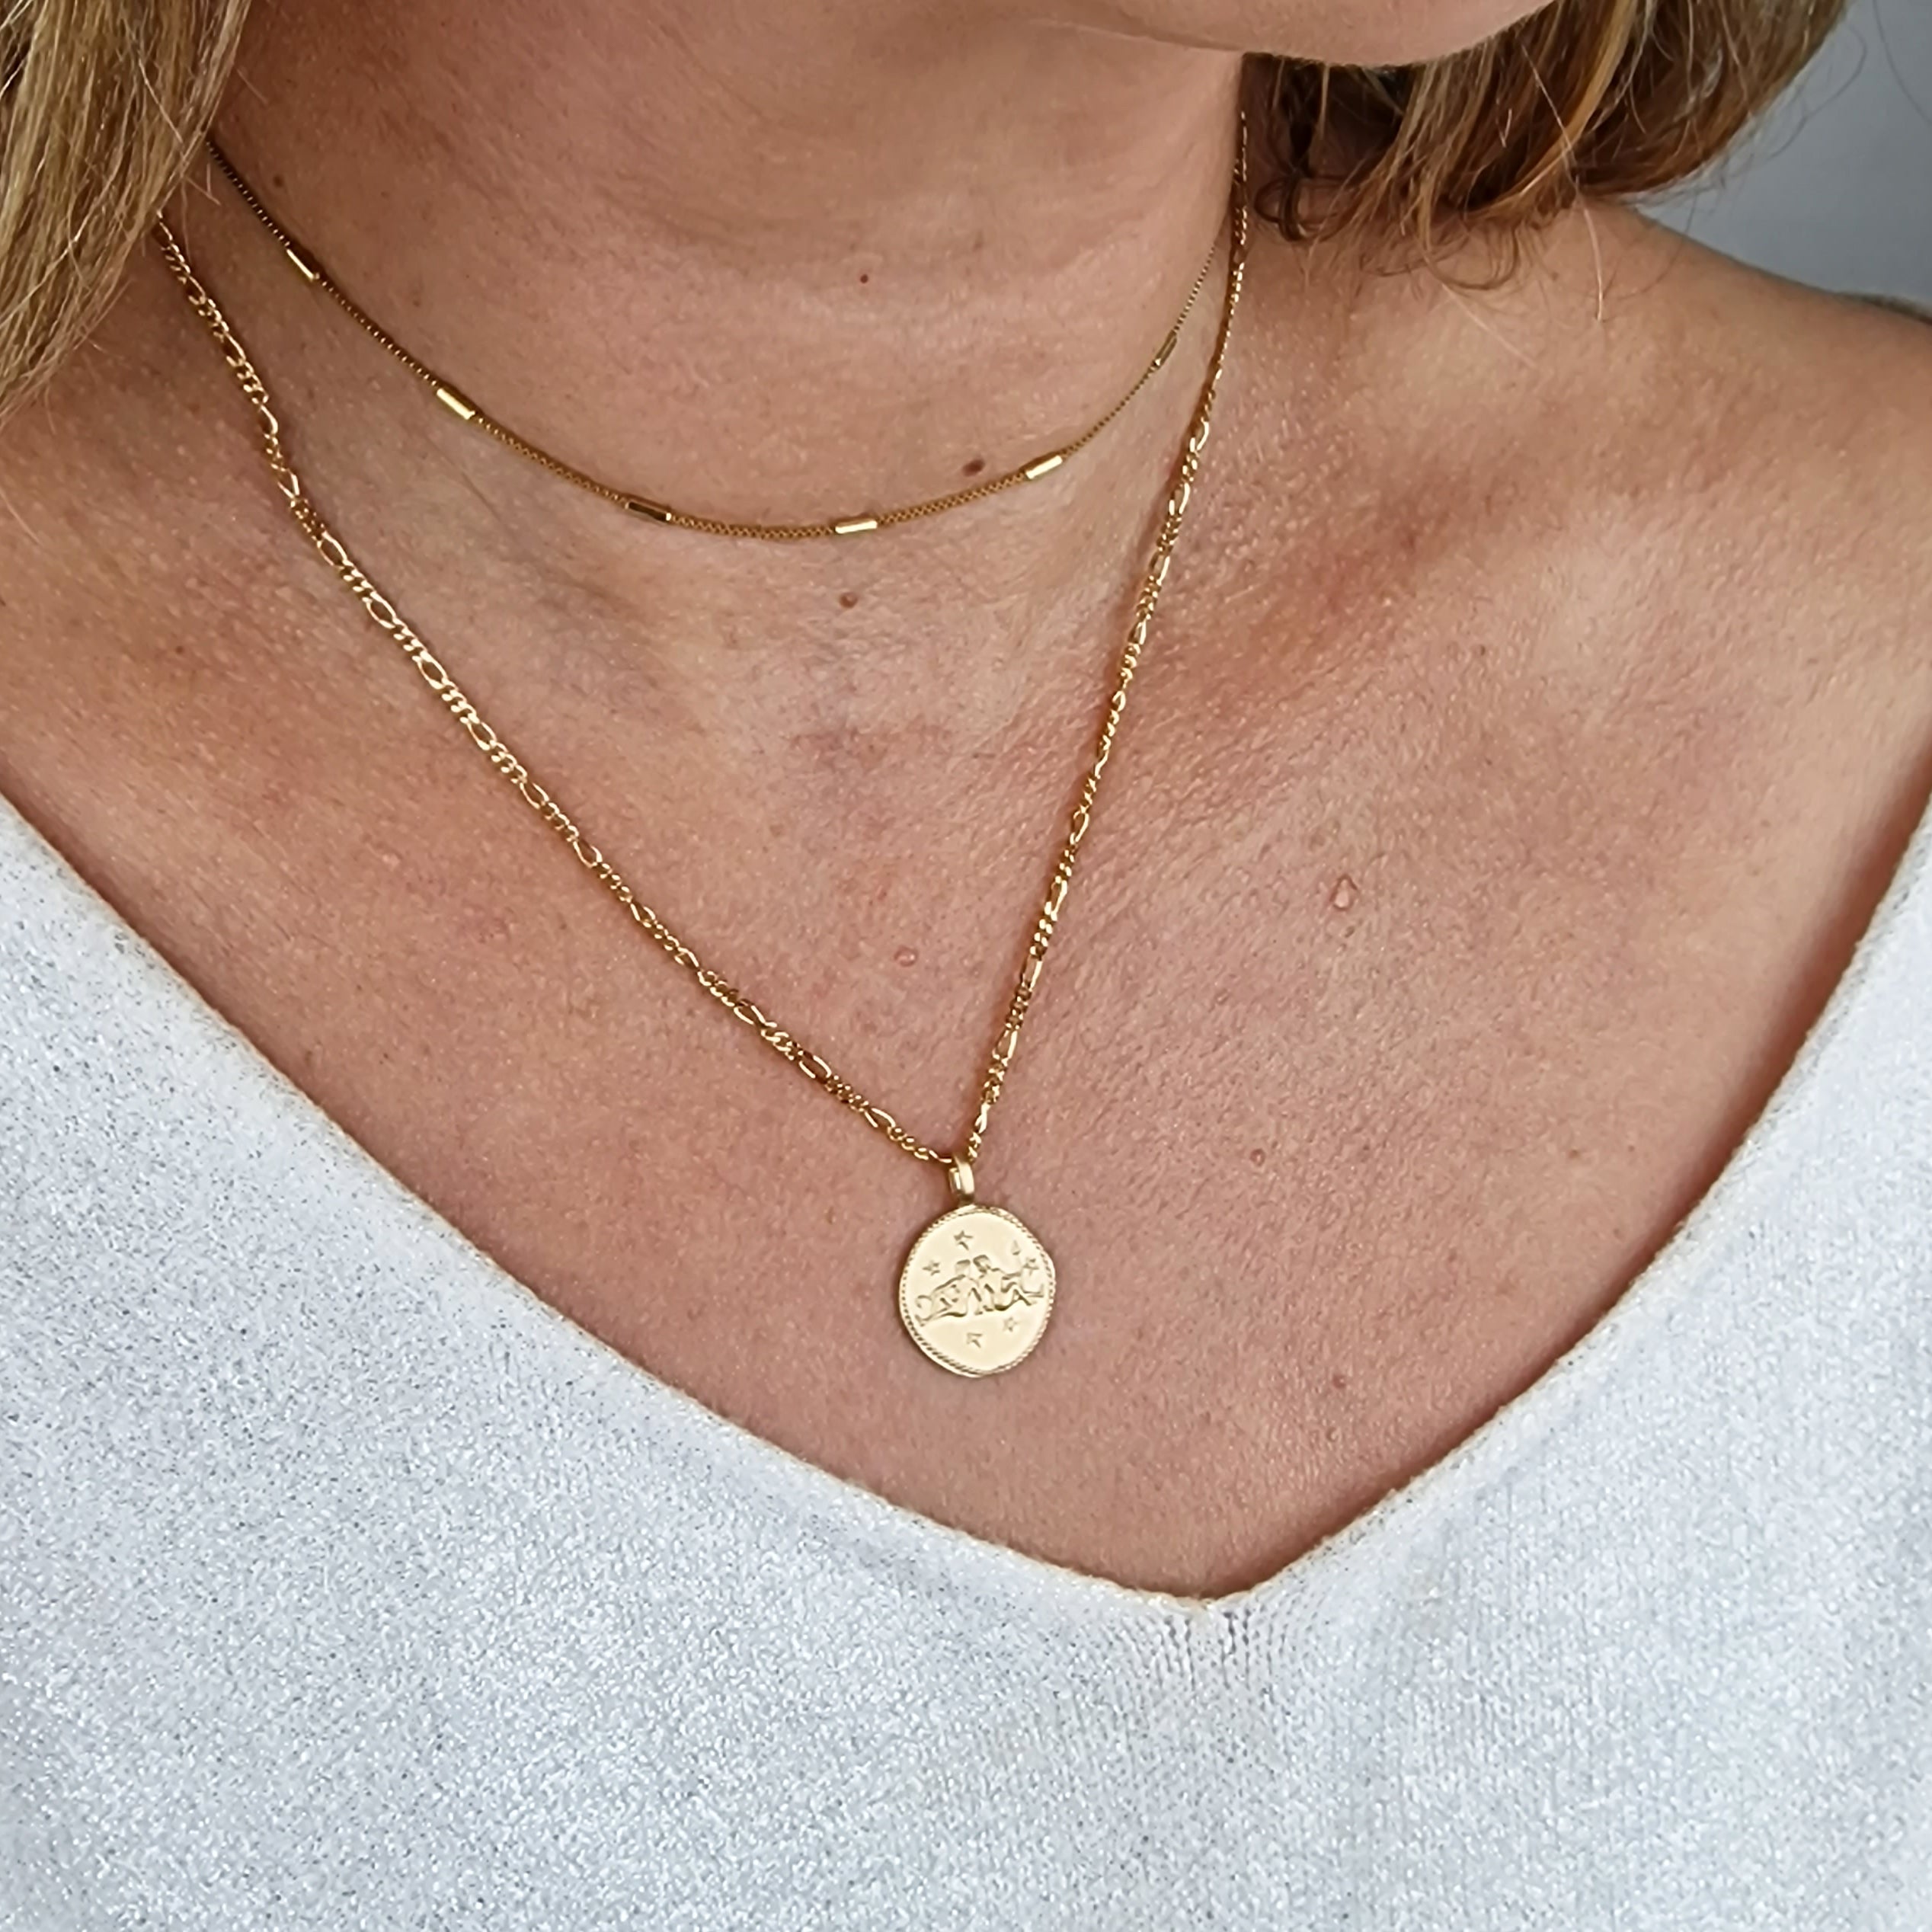 18ct Gold Plated Zodiac Sign Coin Necklace